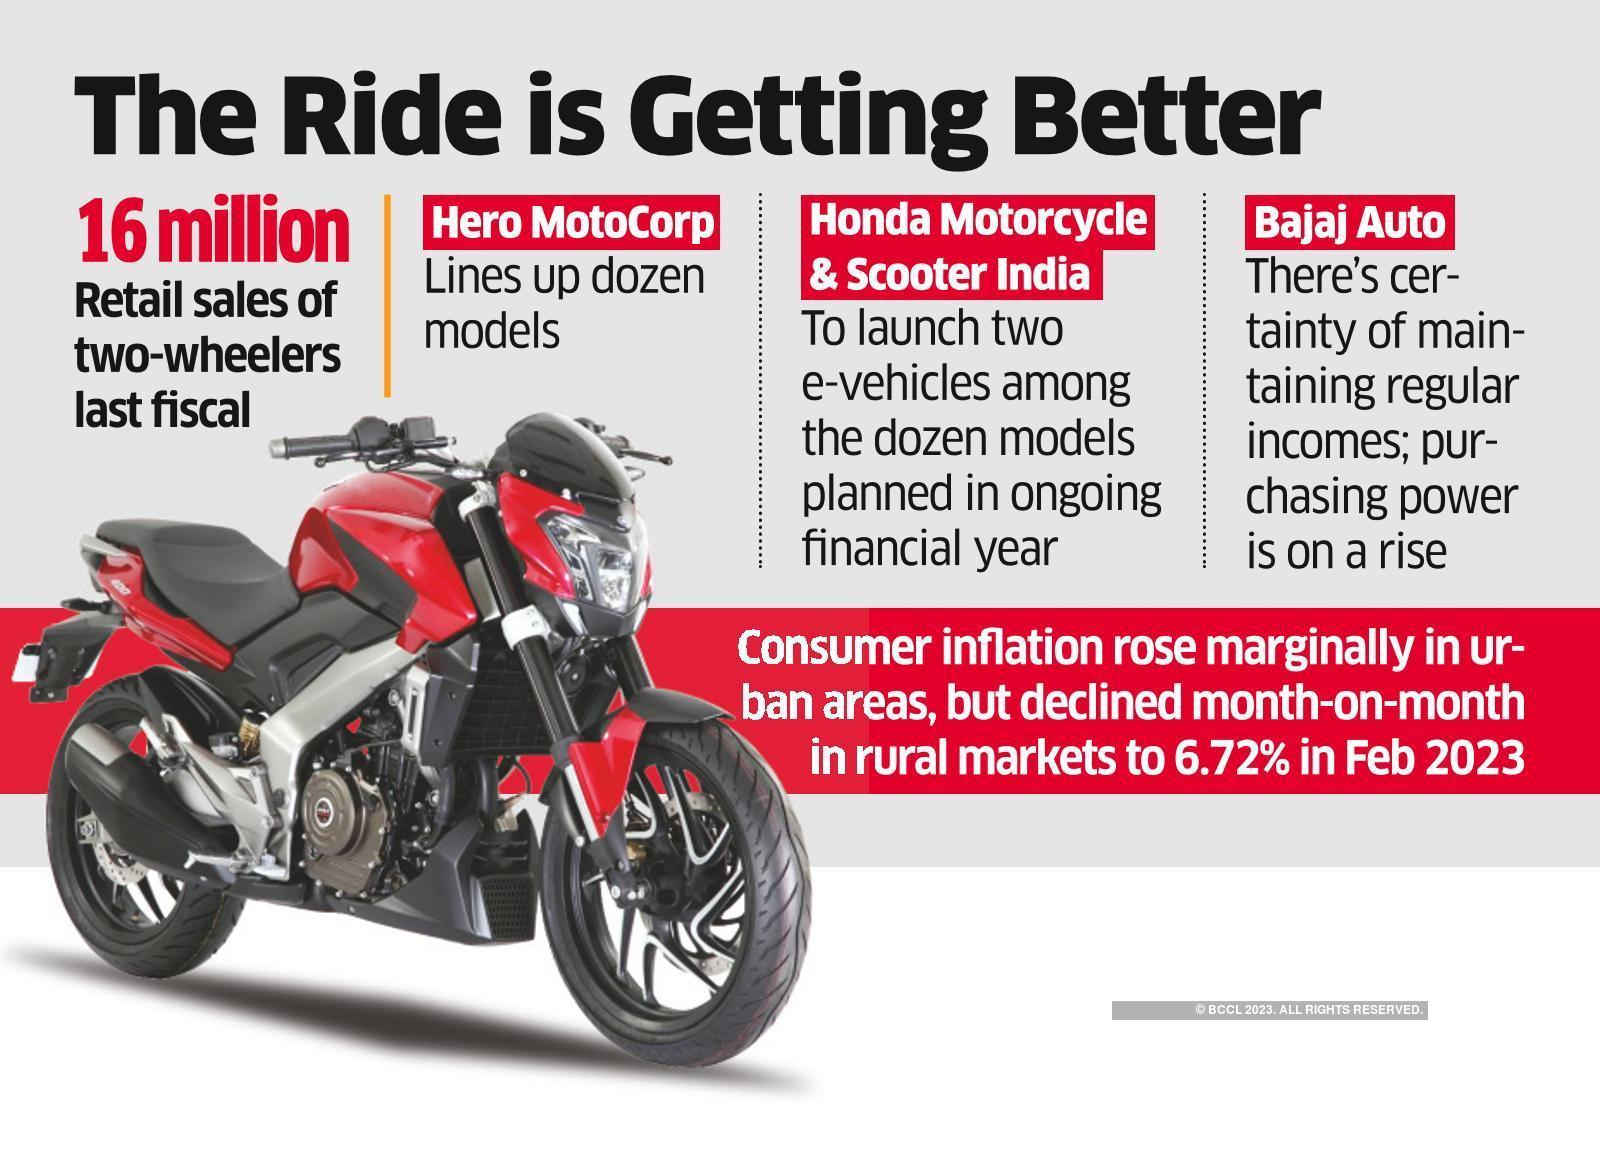 reserve bank of india, honda, vahan, hmsi, federation of automobile dealers association, fada, two-wheeler sales in sweet spot again as rural demand picks up